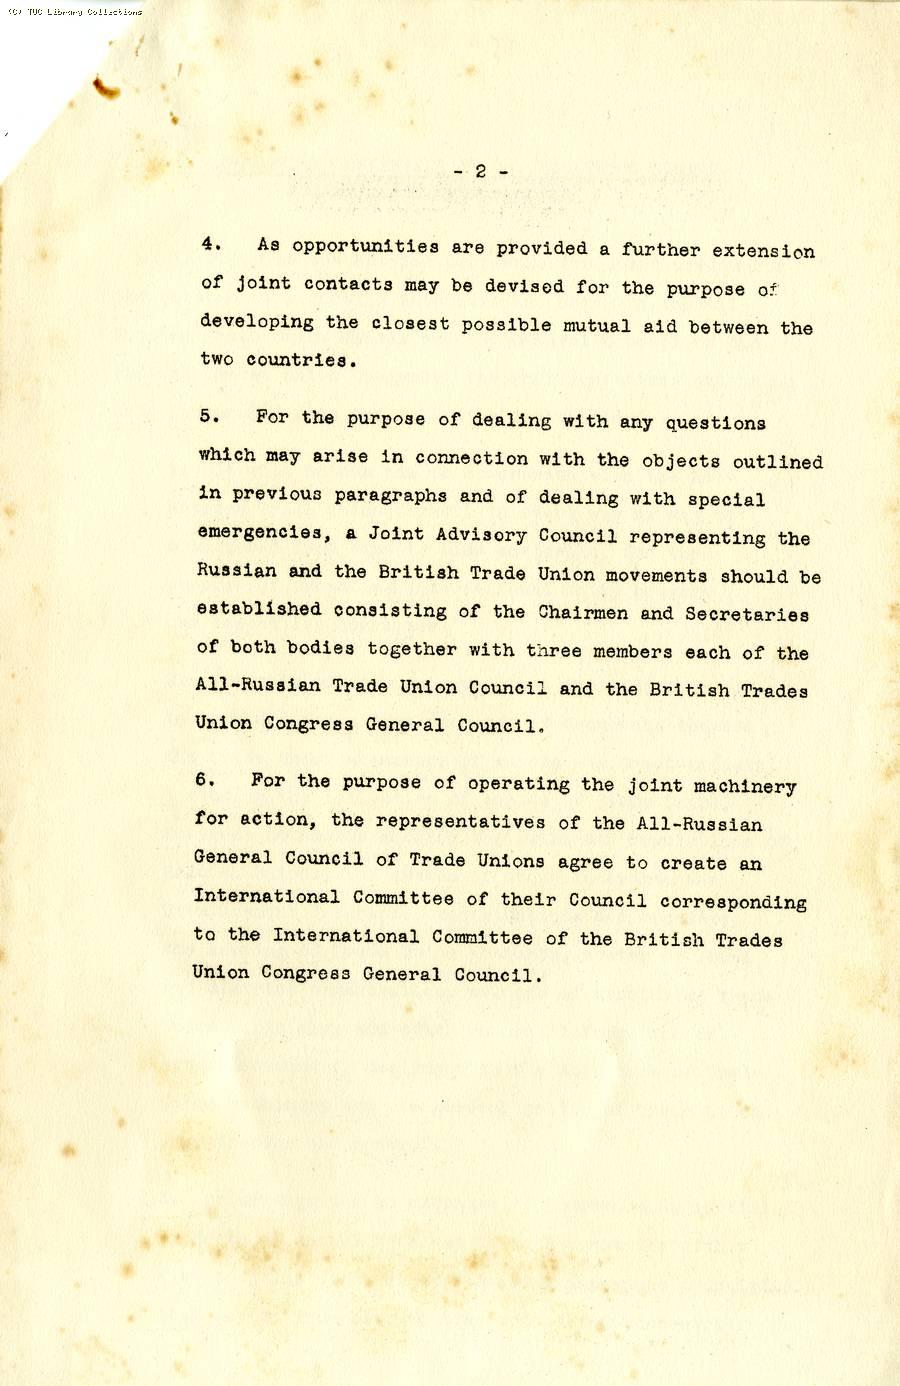 Anglo Russian Trade Union Conference 7 April, 1925